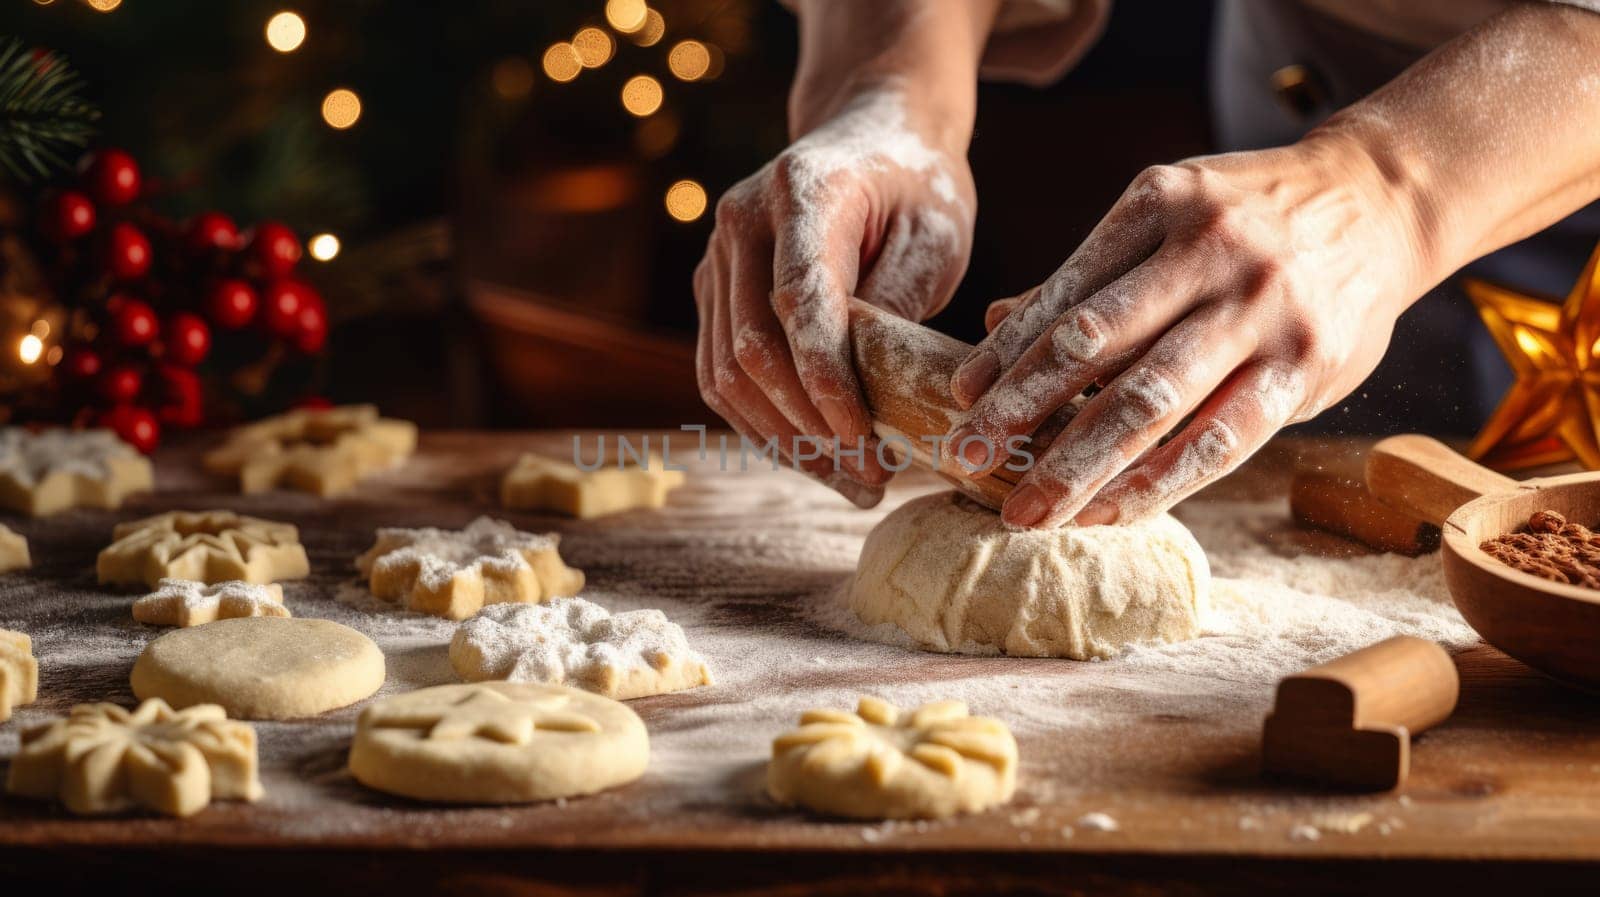 a person making Christmas cookies with festive decorations in the background. It is a holiday tradition of baking and decorating. by DogDrawHand